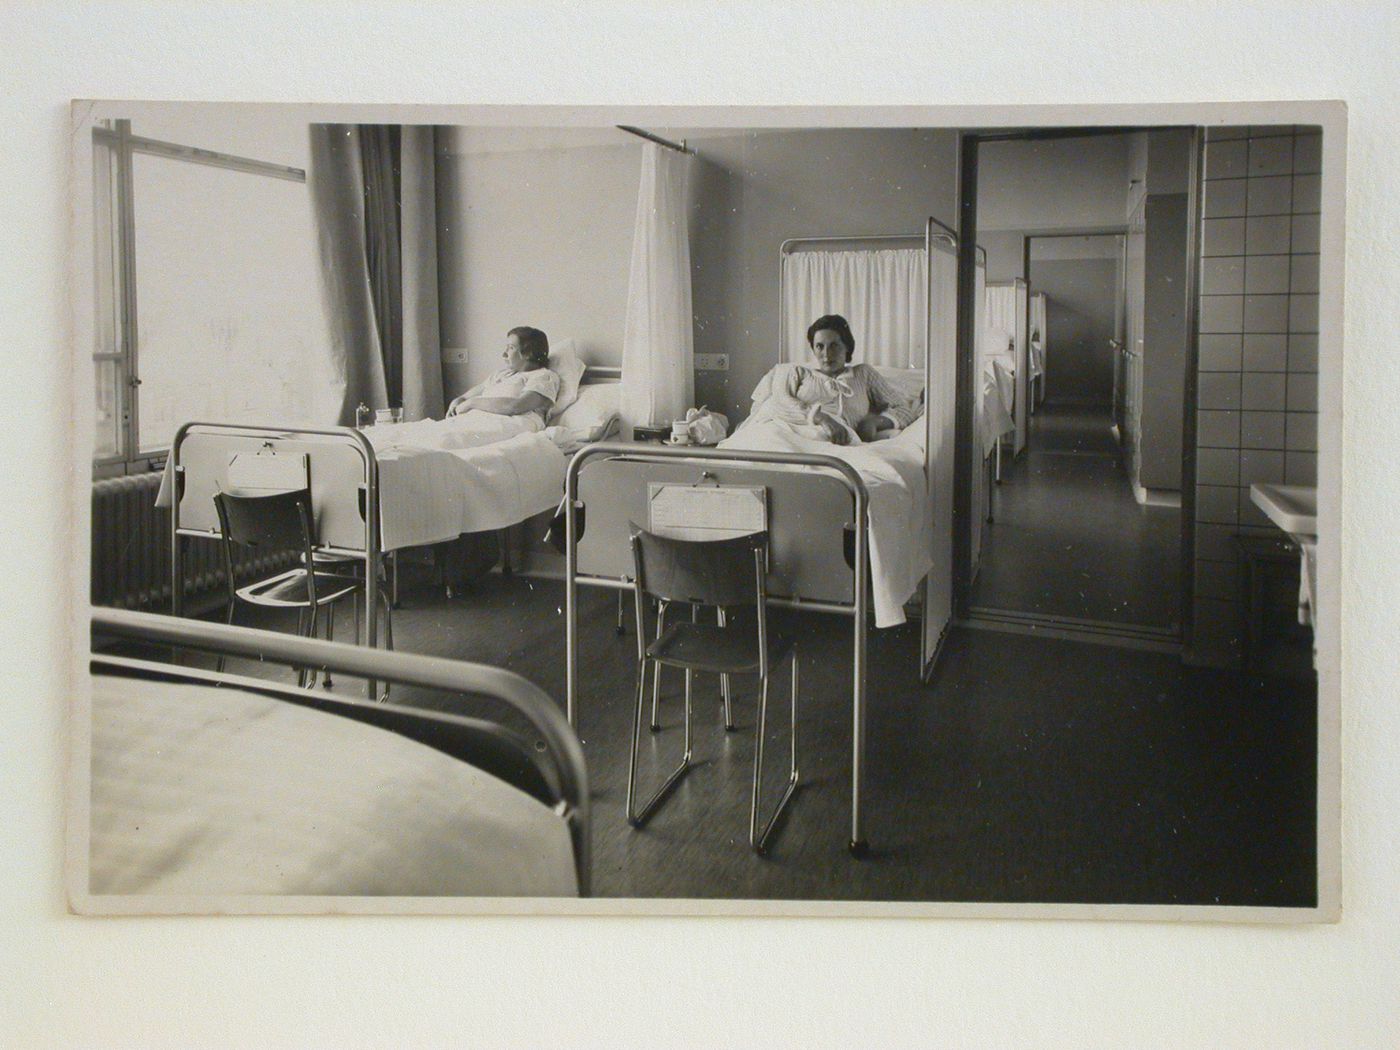 The Diaconessen - inrichting extension, third-class room, with two women patients in bed, Rotterdam, Netherlands